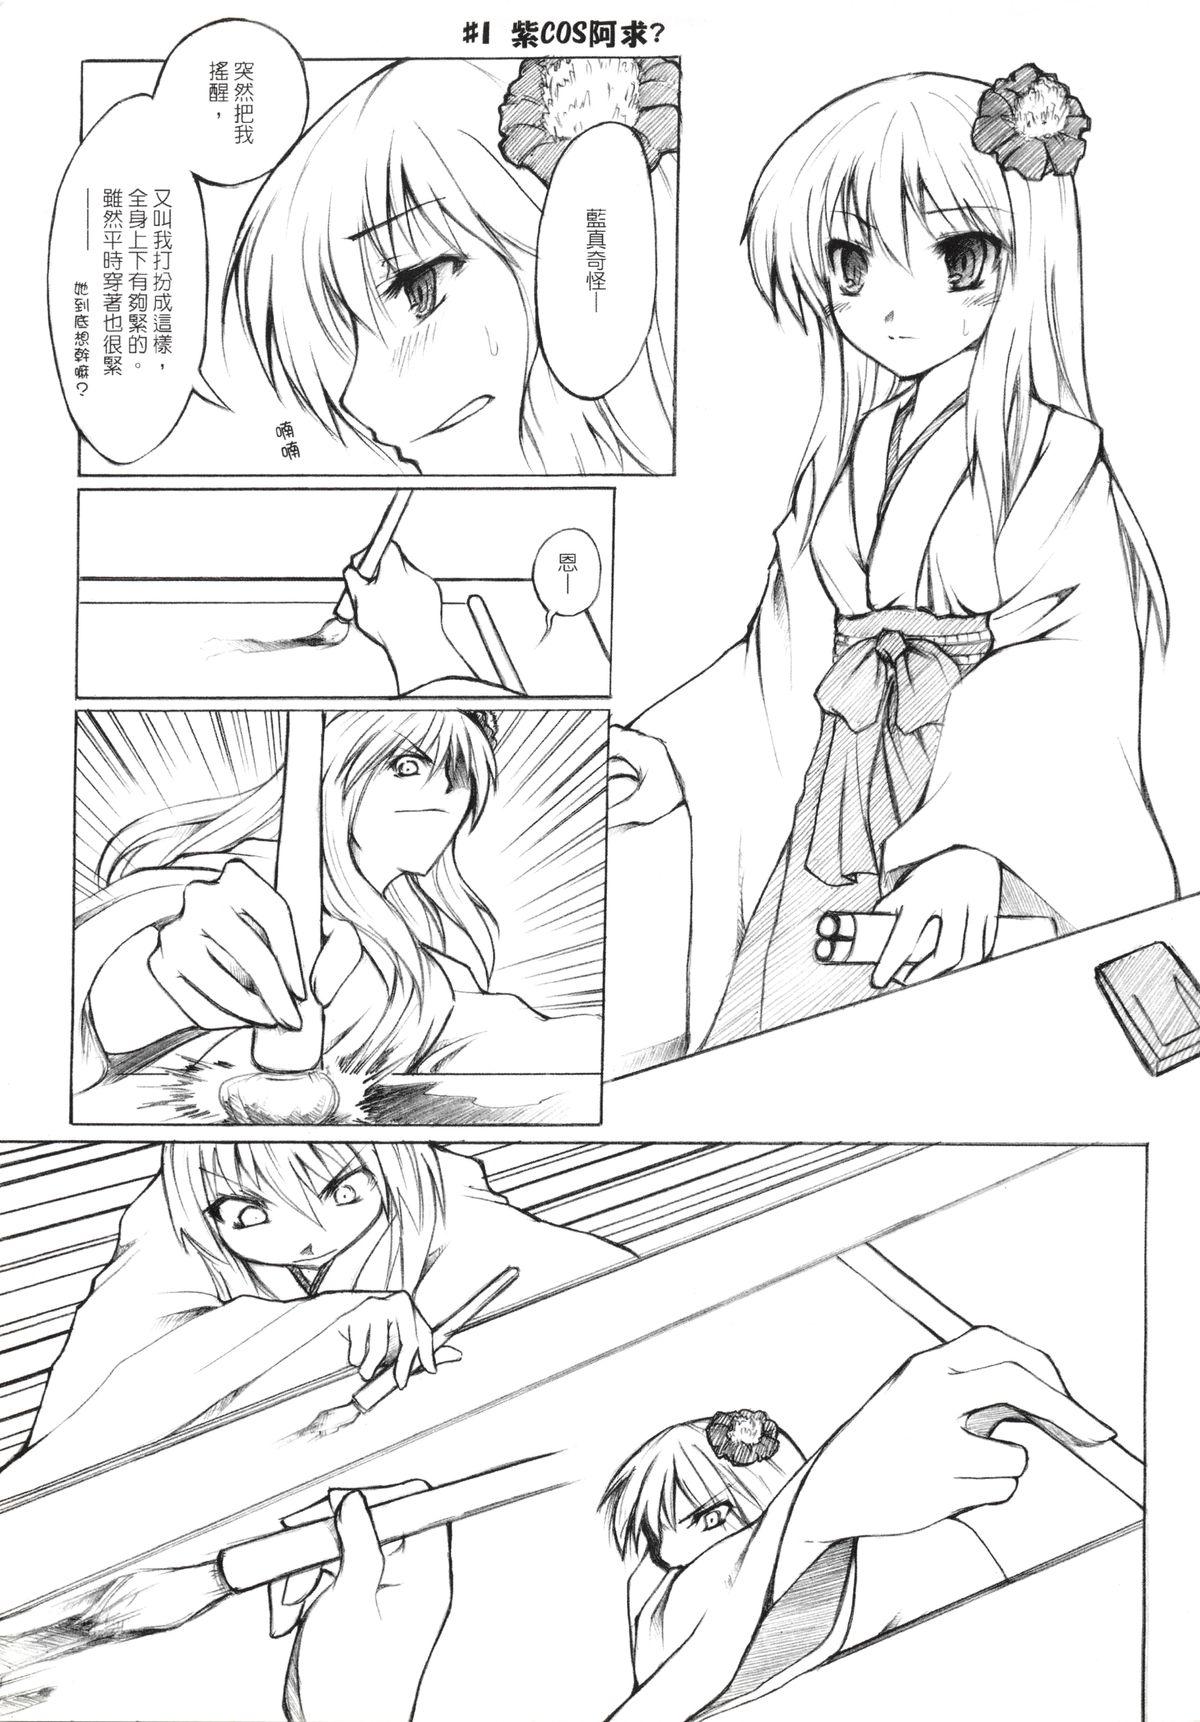 Women 紫隙間Die! - Touhou project Brazzers - Page 7